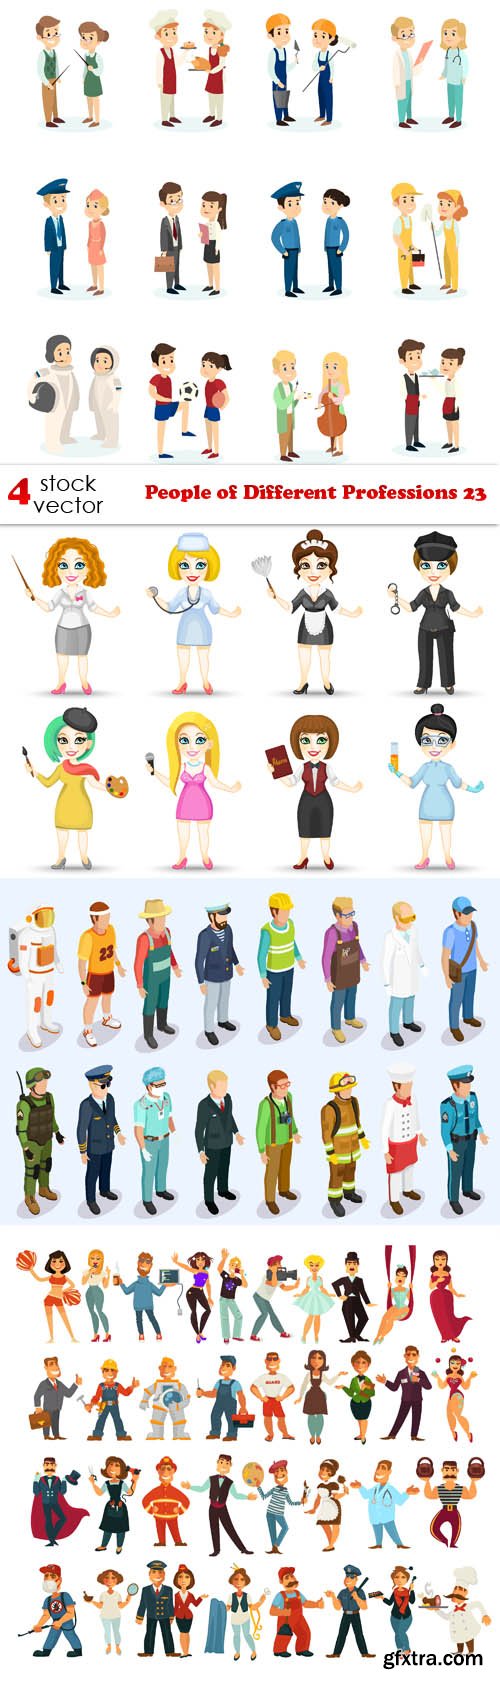 Vectors - People of Different Professions 23